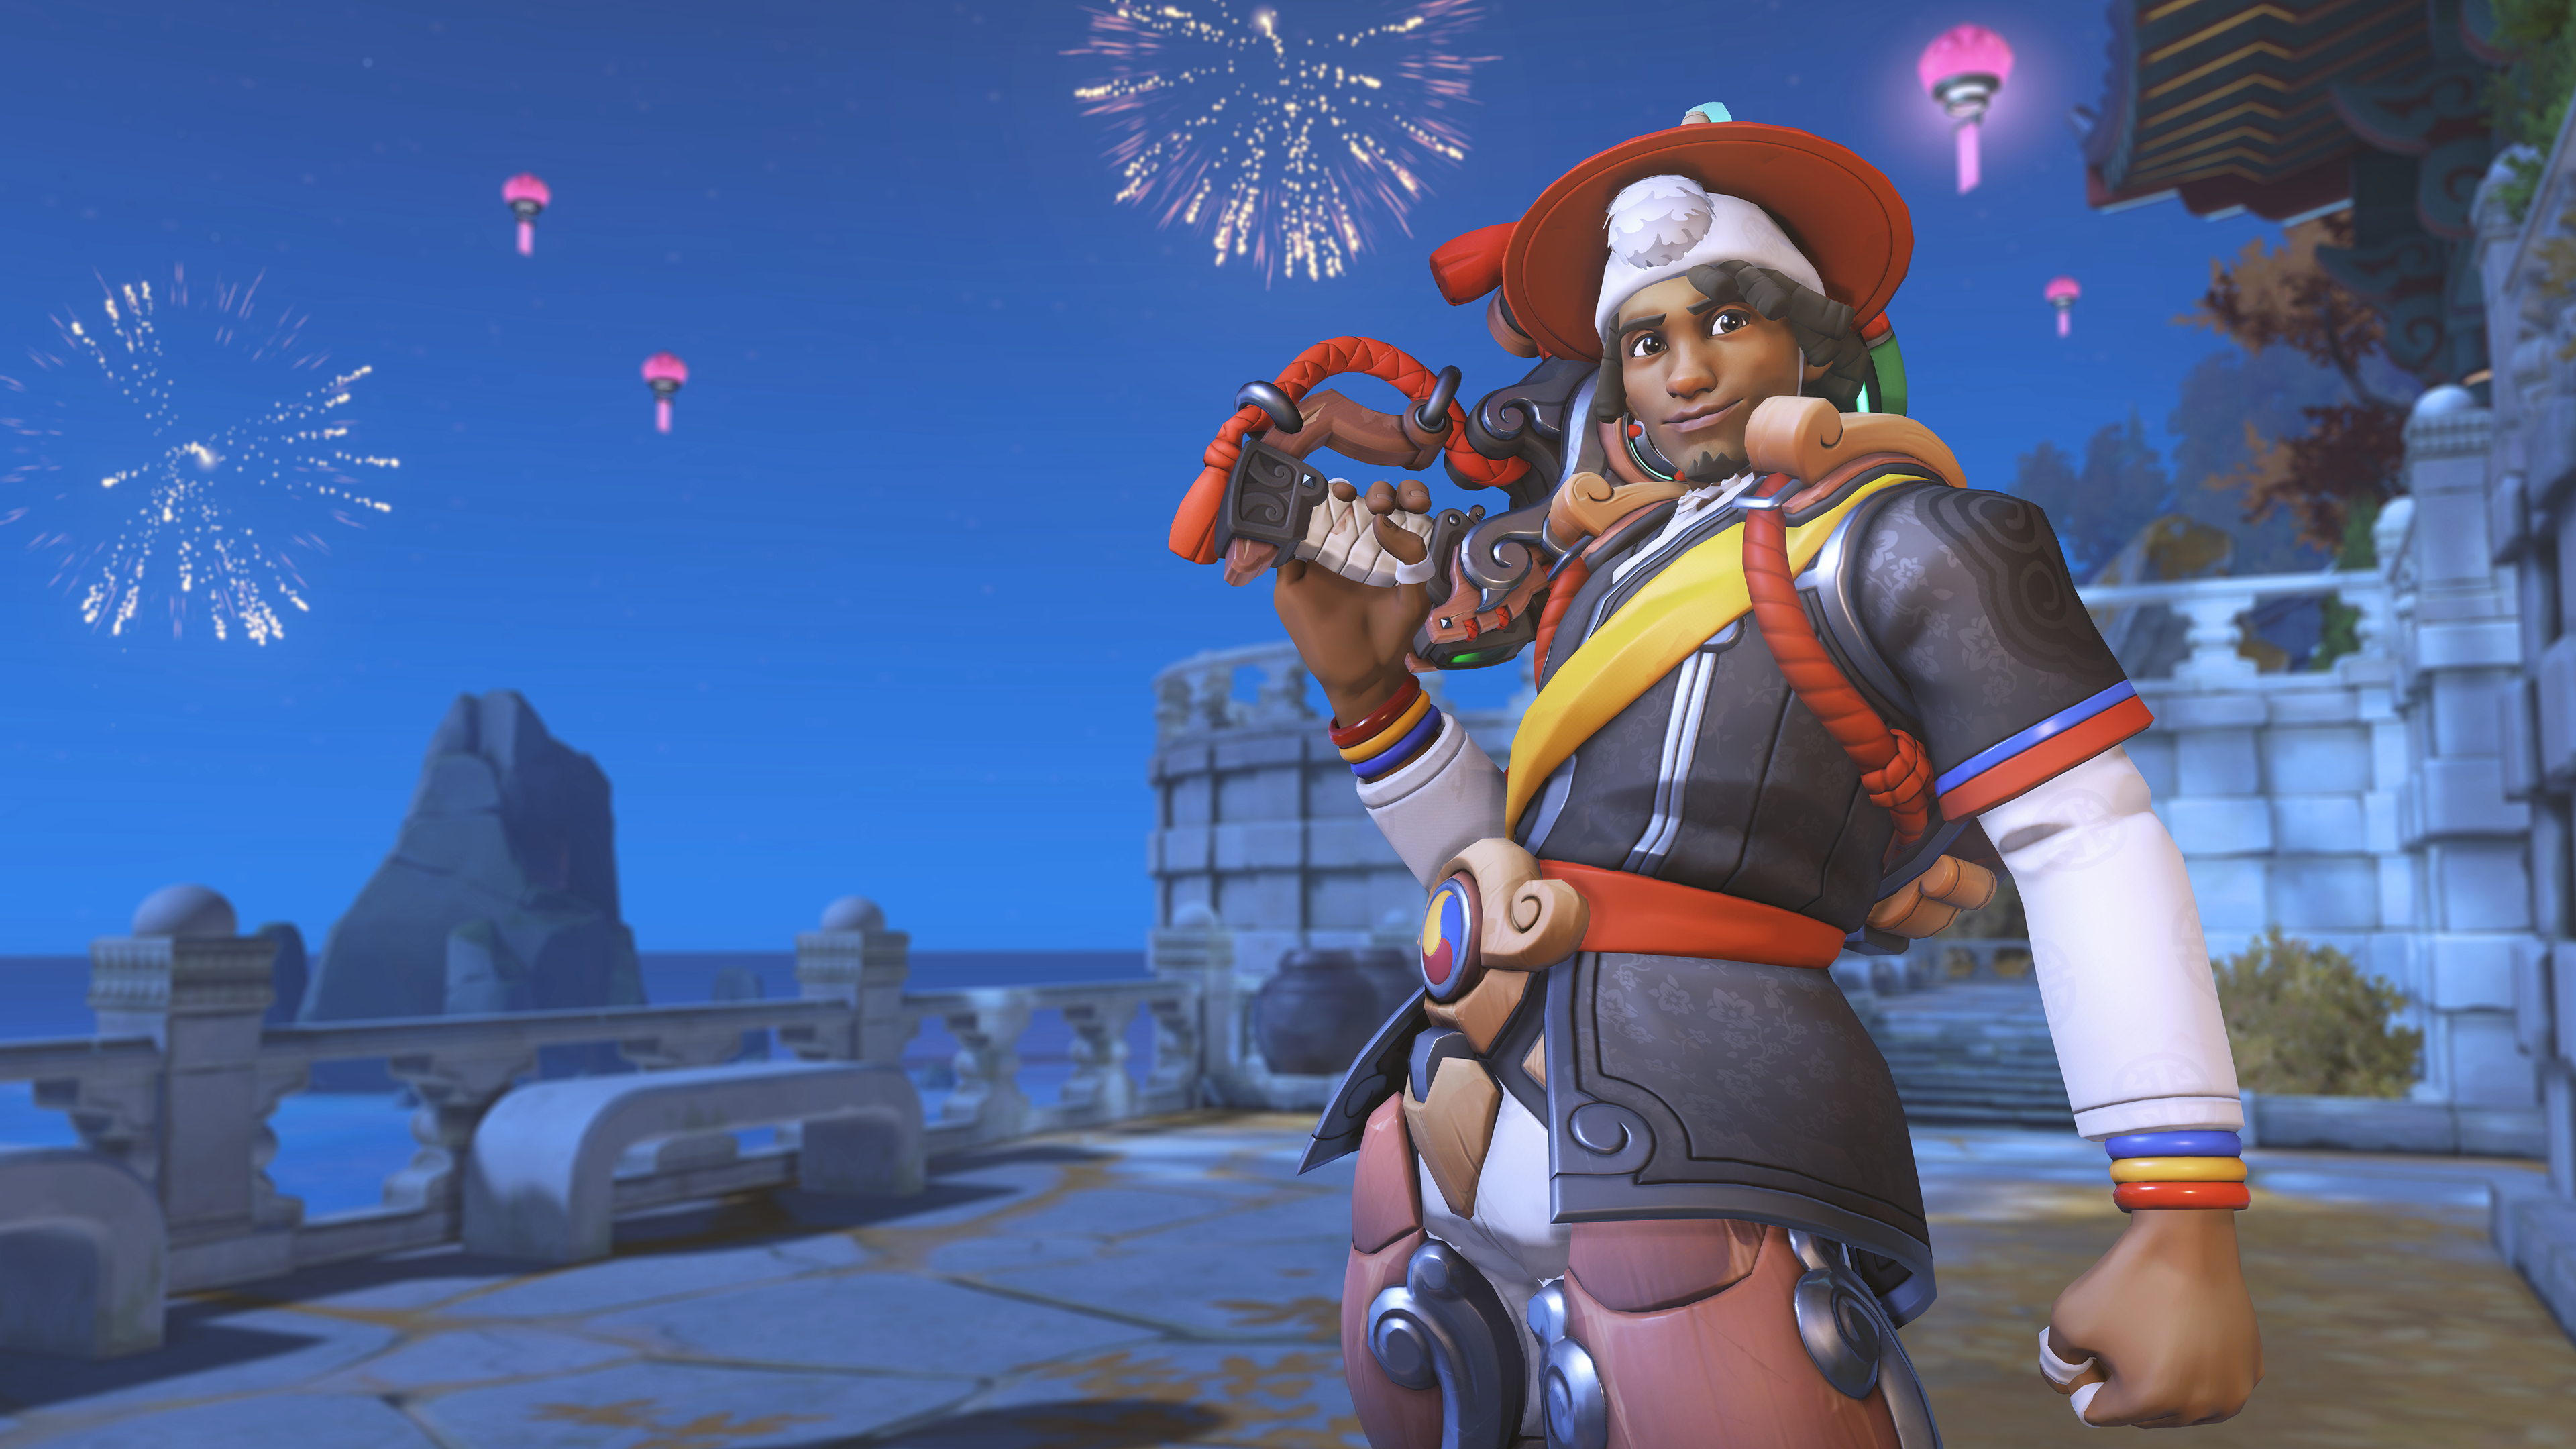 Overwatch Event Calendar 2022 All Of The Seasonal Events Expected In Overwatch In 2022 - Dot Esports